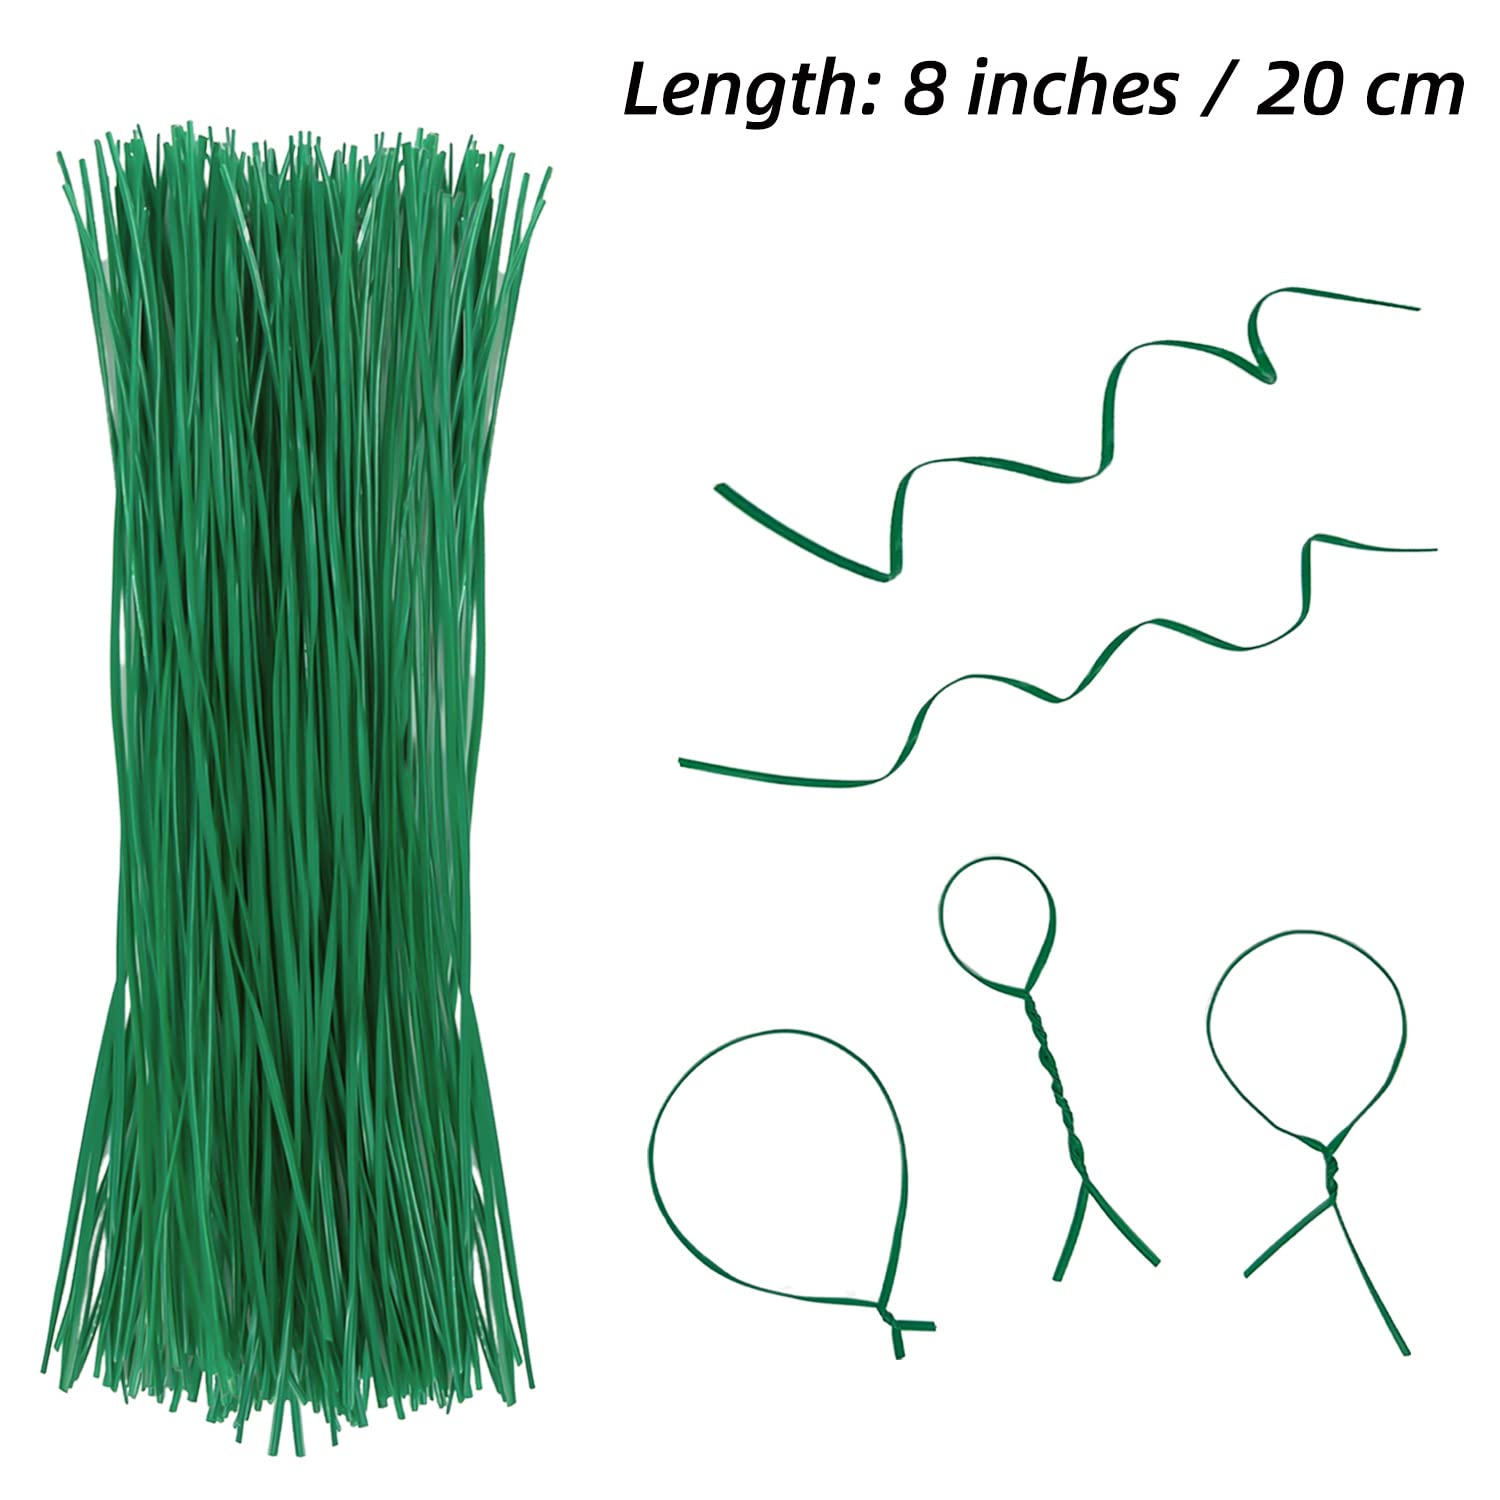 Plant Twist Ties - 8'' Plant Ties for Climbing Plants - Garden Ties Reusable Twist Ties Garden Twine for Plants Vines Cords Bags - Pack of 100, Green